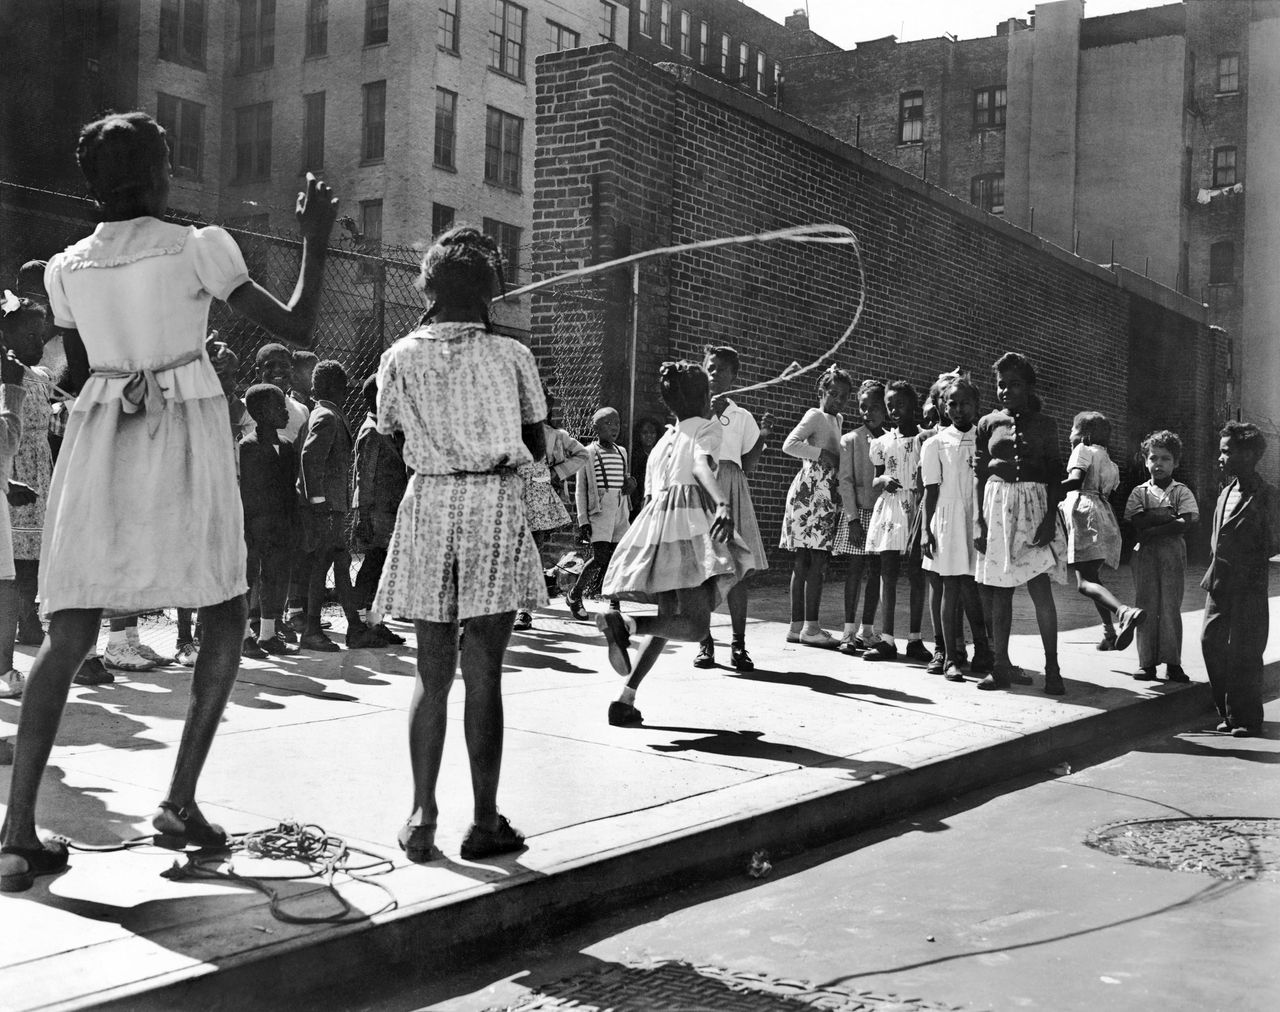 1946: Rope skipping on a block in Harlem, where Zora Neale Hurston led a group of women who were working to bring joy and "stem youthful delinquency" with activities, trips and games.